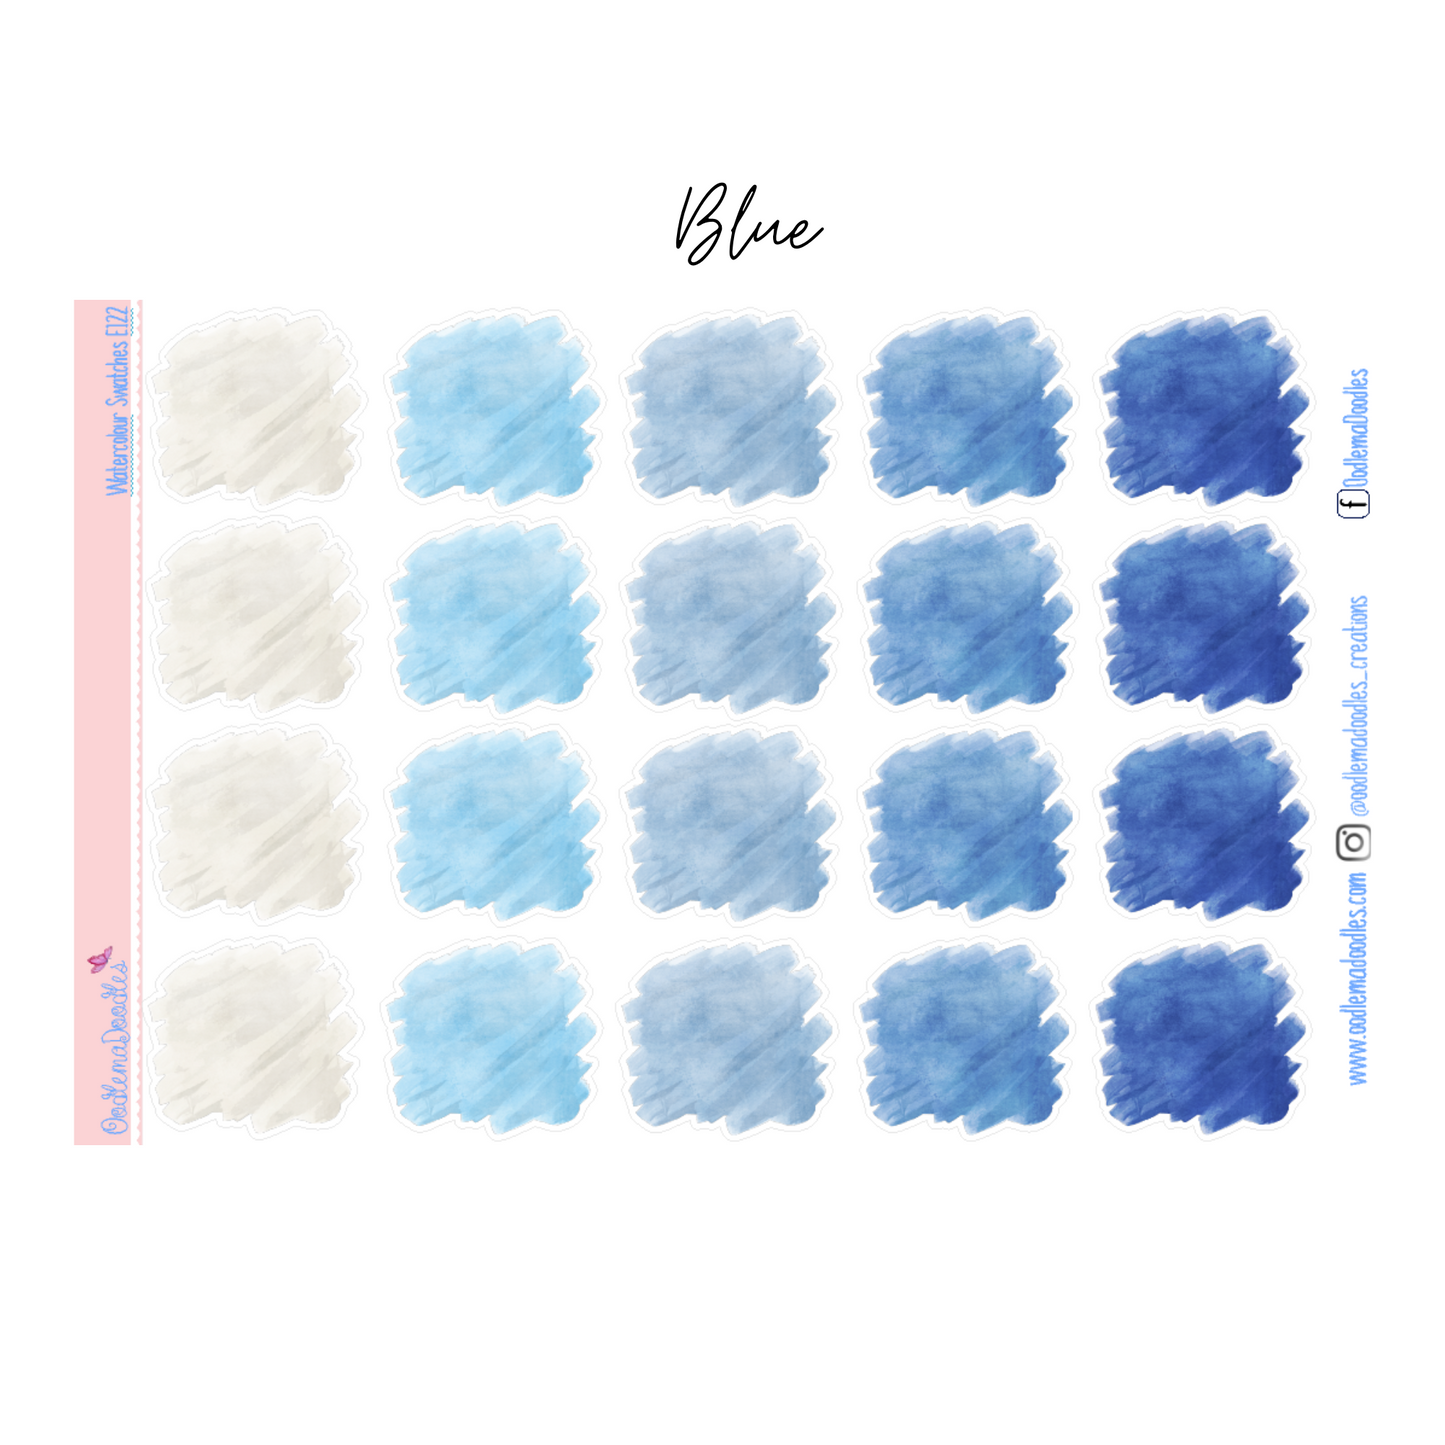 Watercolour Square Swatches Stickers